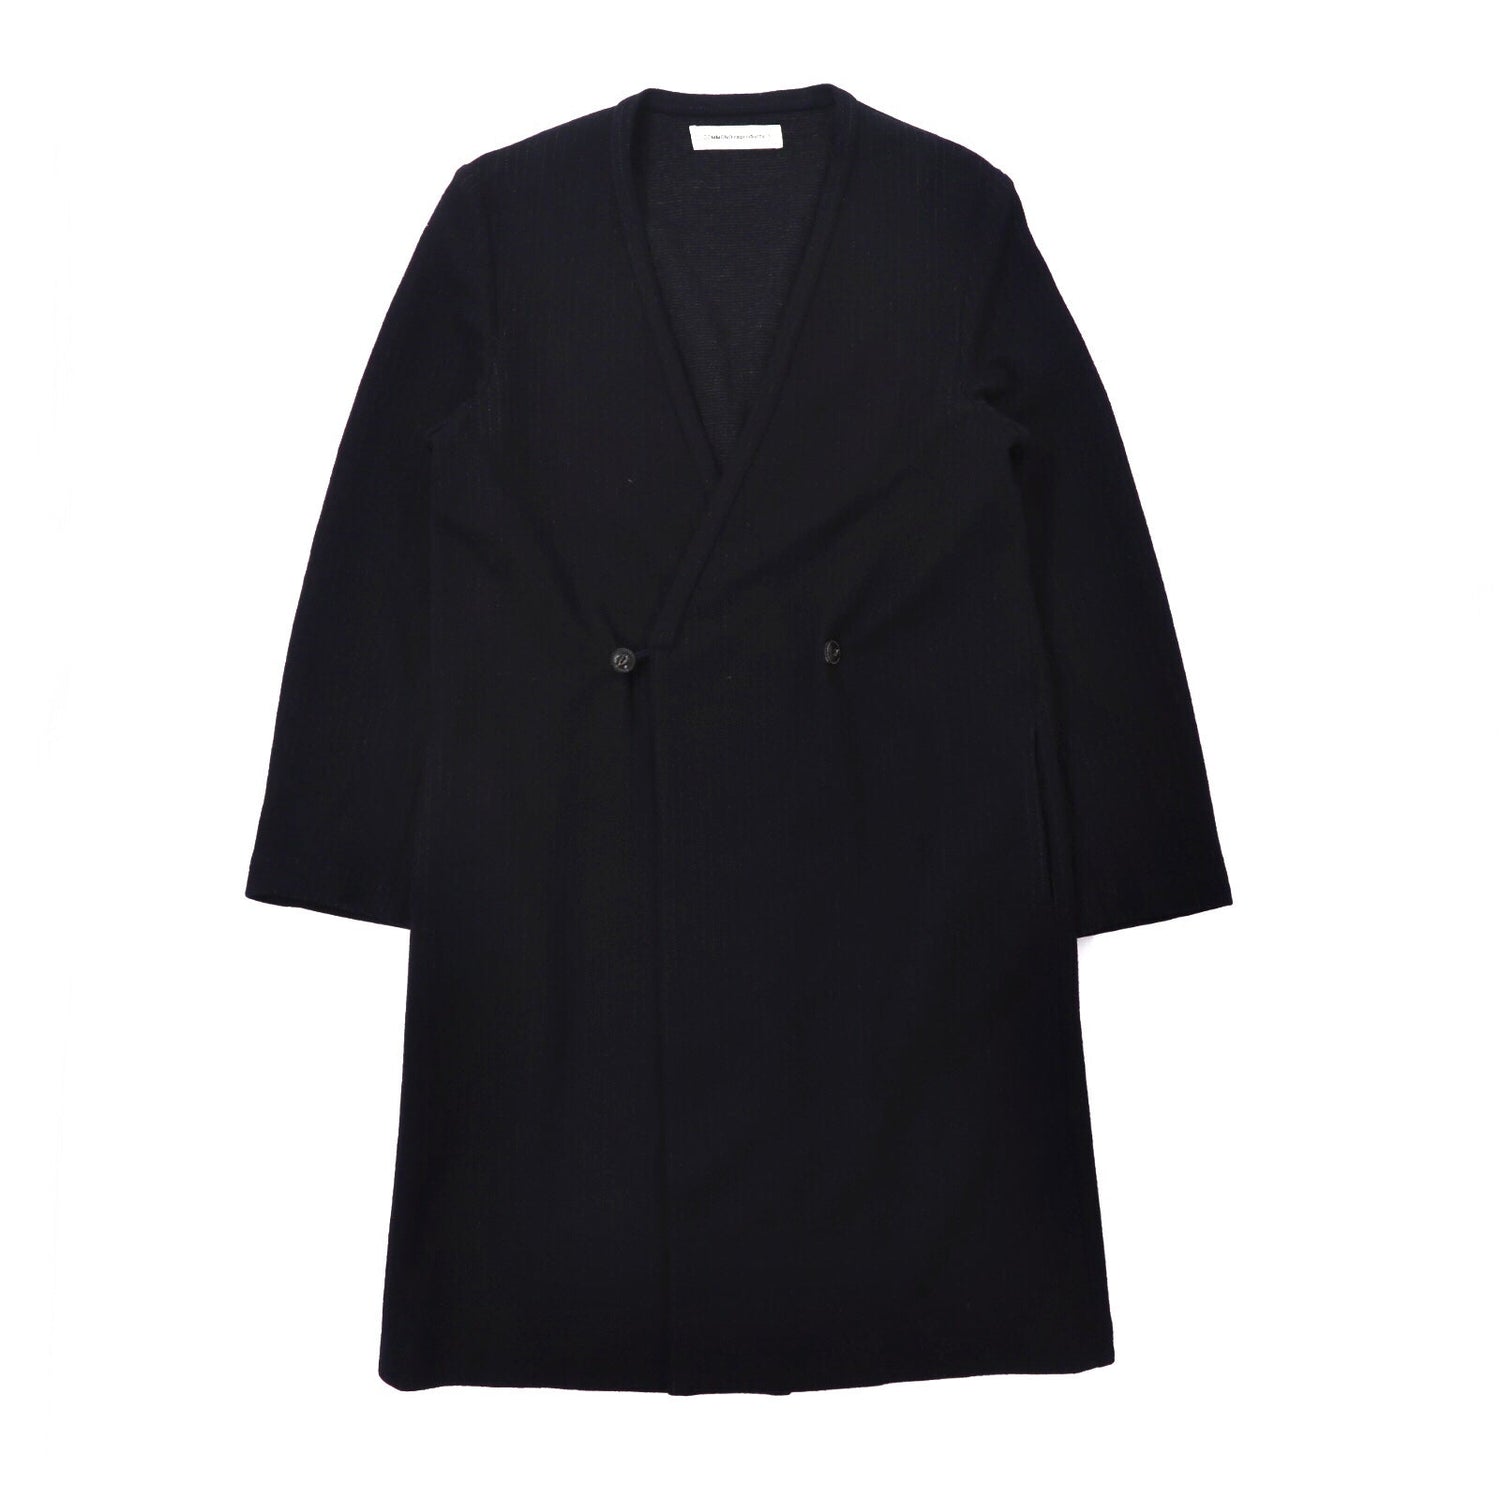 Commono Reproduct Double Chester coat 1 Navy Striped Wool Made in ...